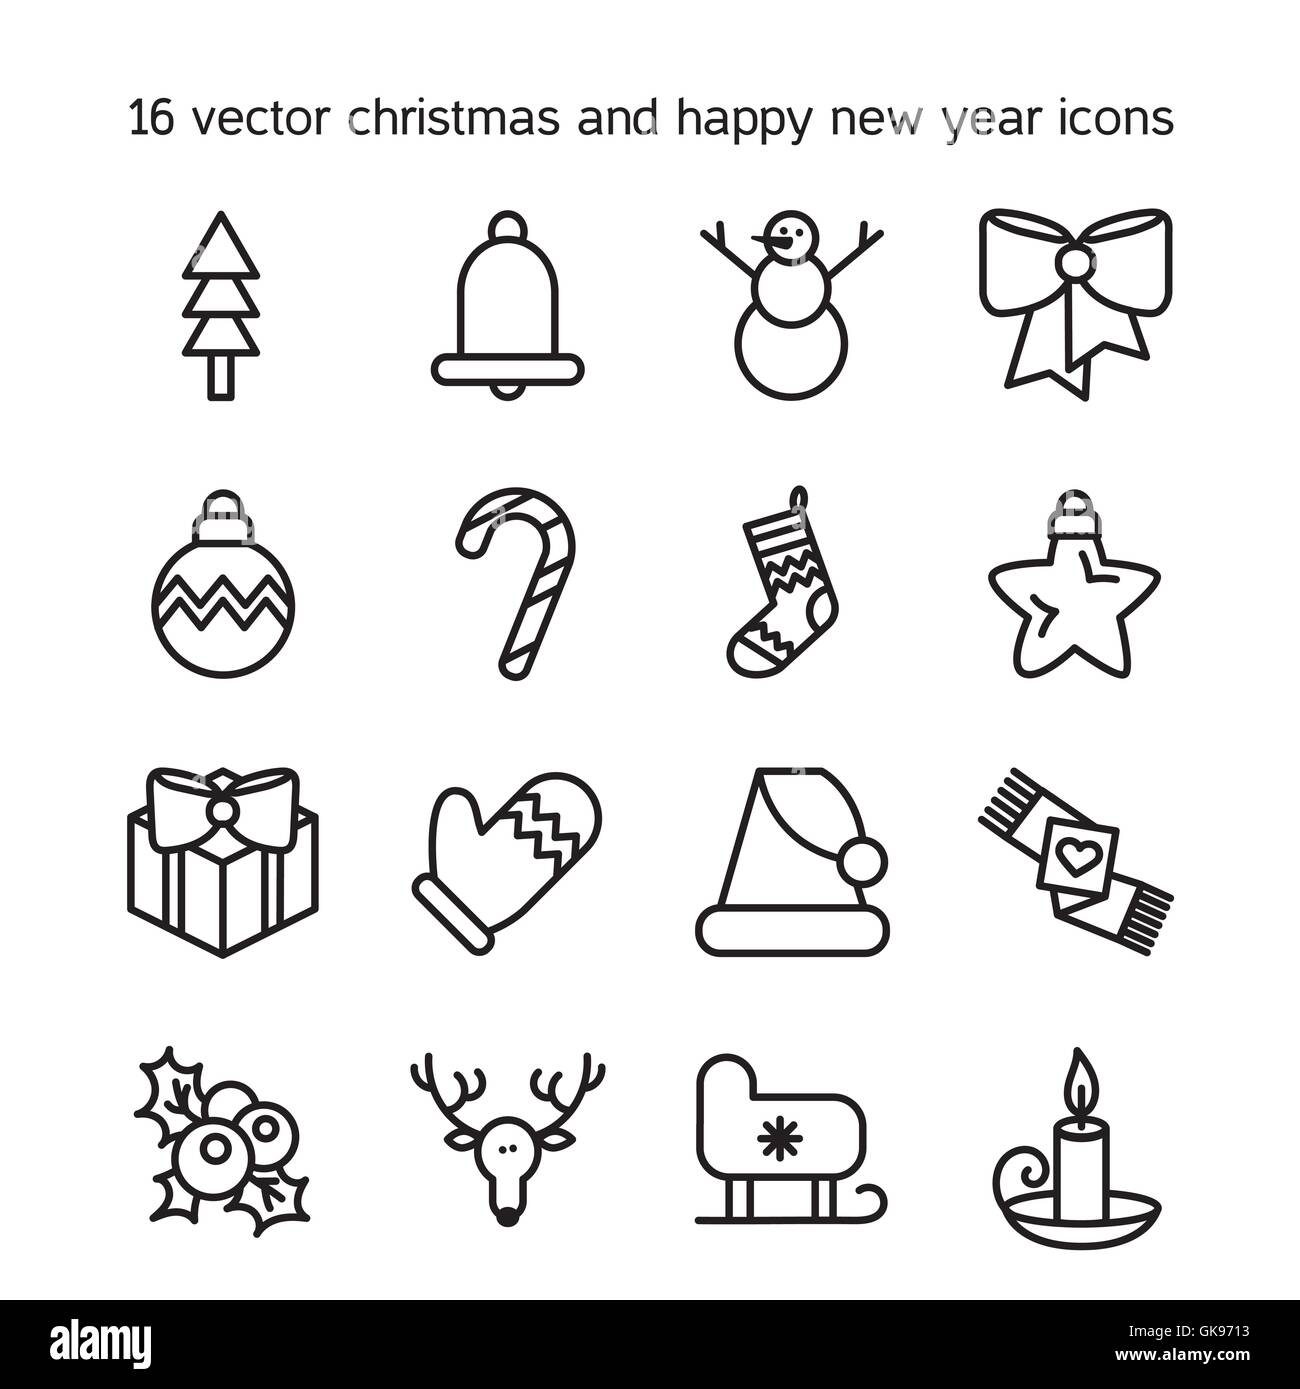 Merry Christmas icons set. Happy new year symbols. Winter holiday signs. Vector Stock Vector